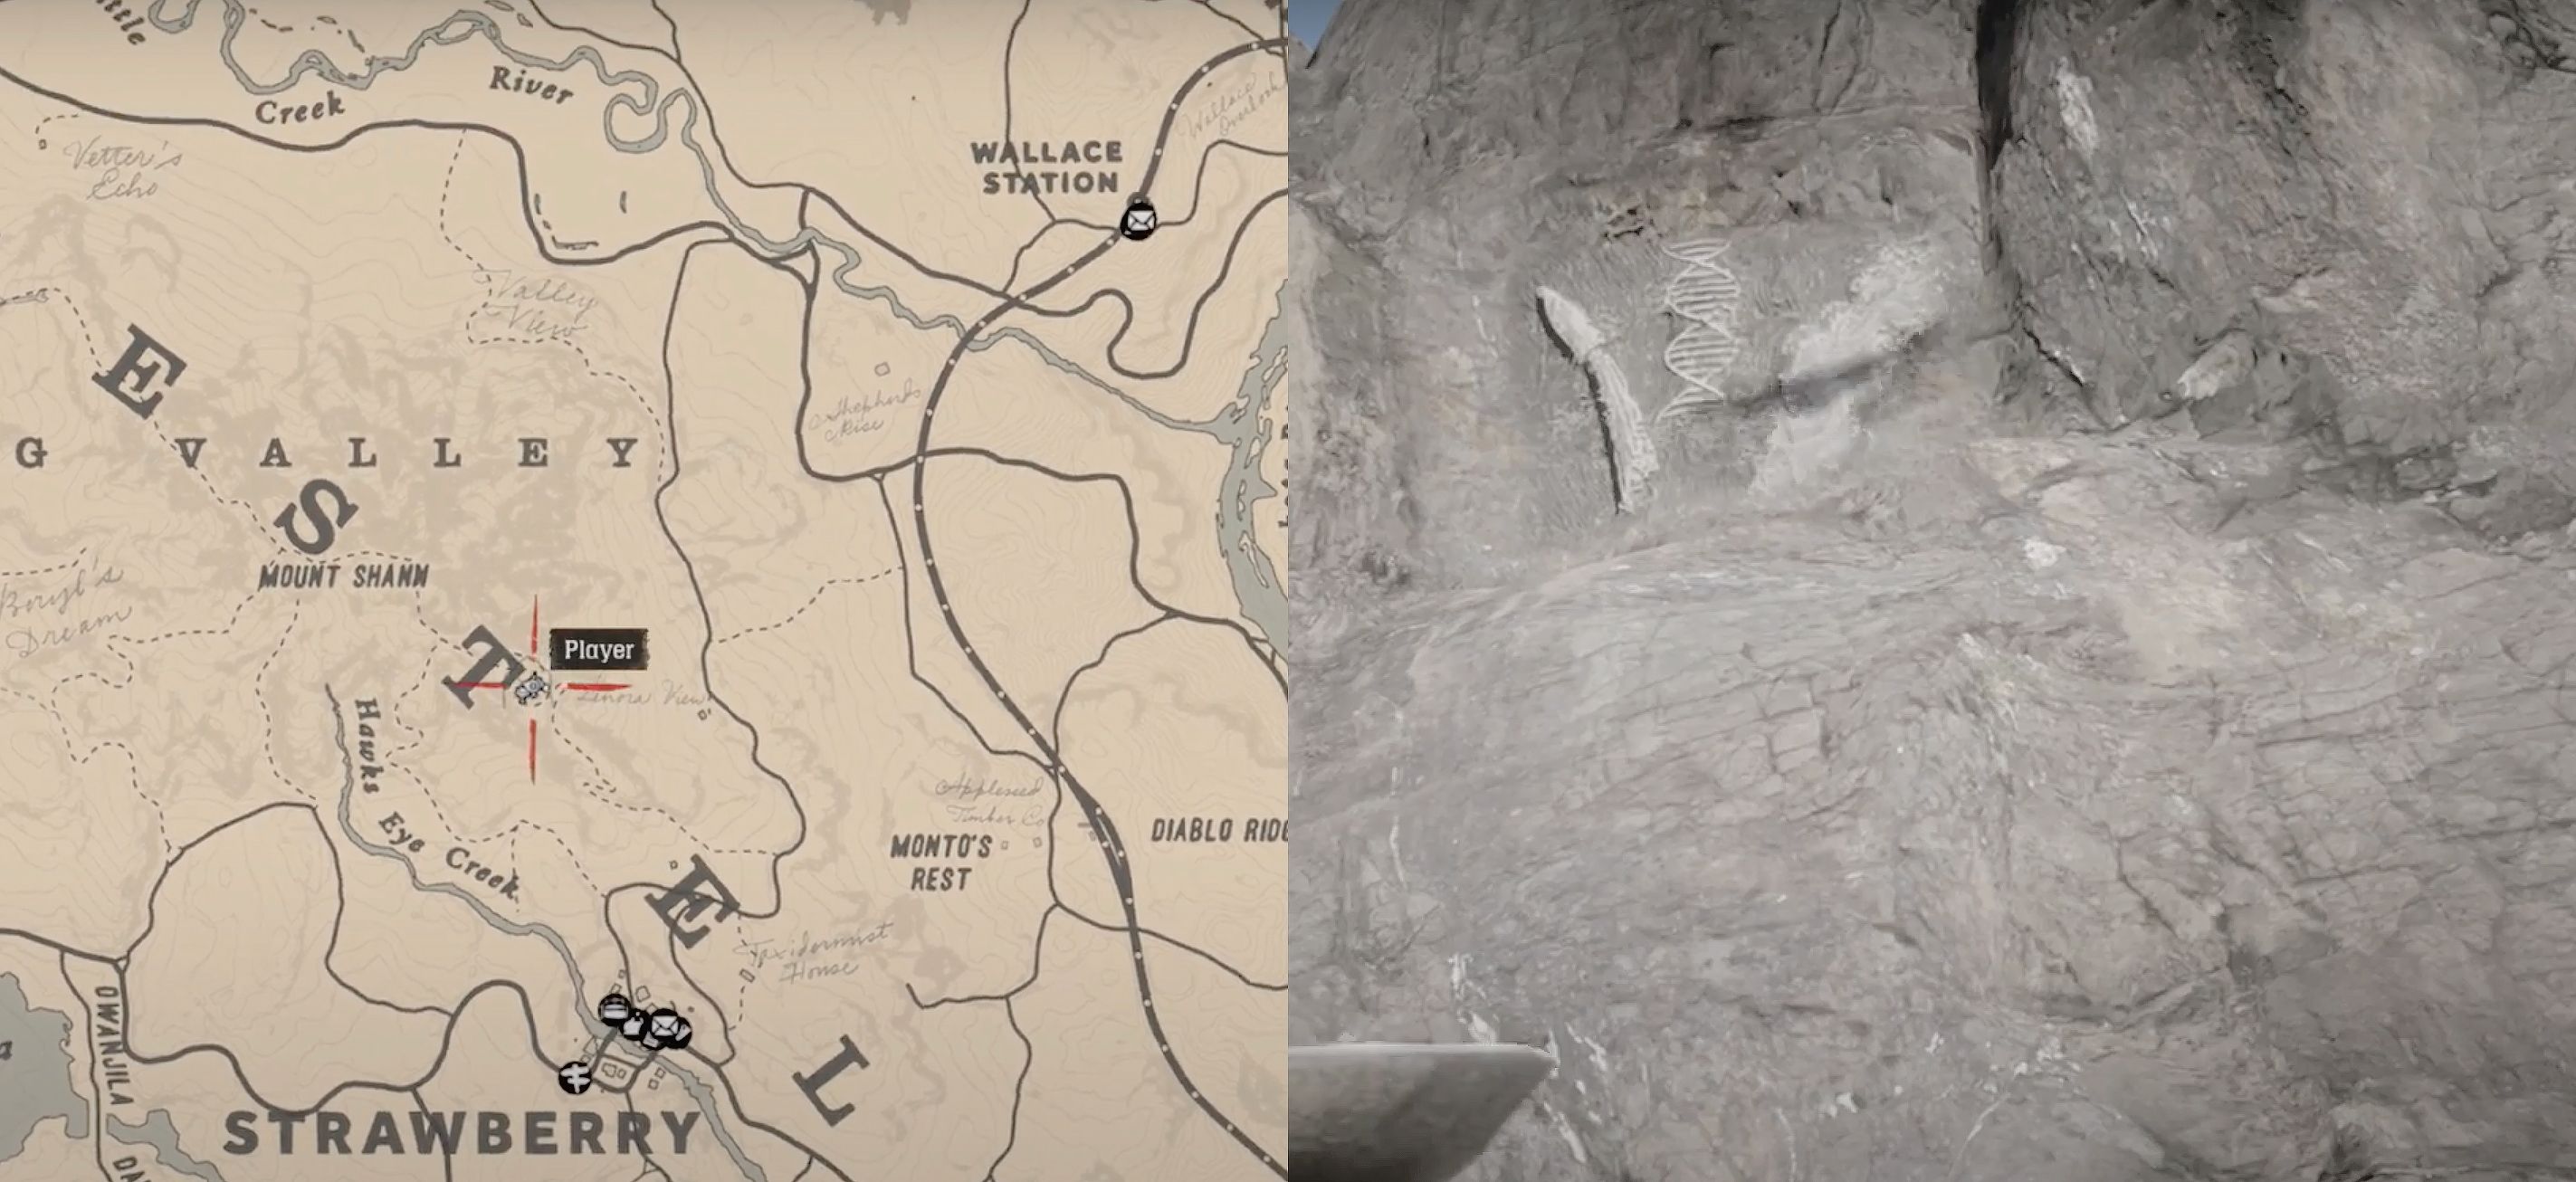 Mount Shann Map And Rock Carving